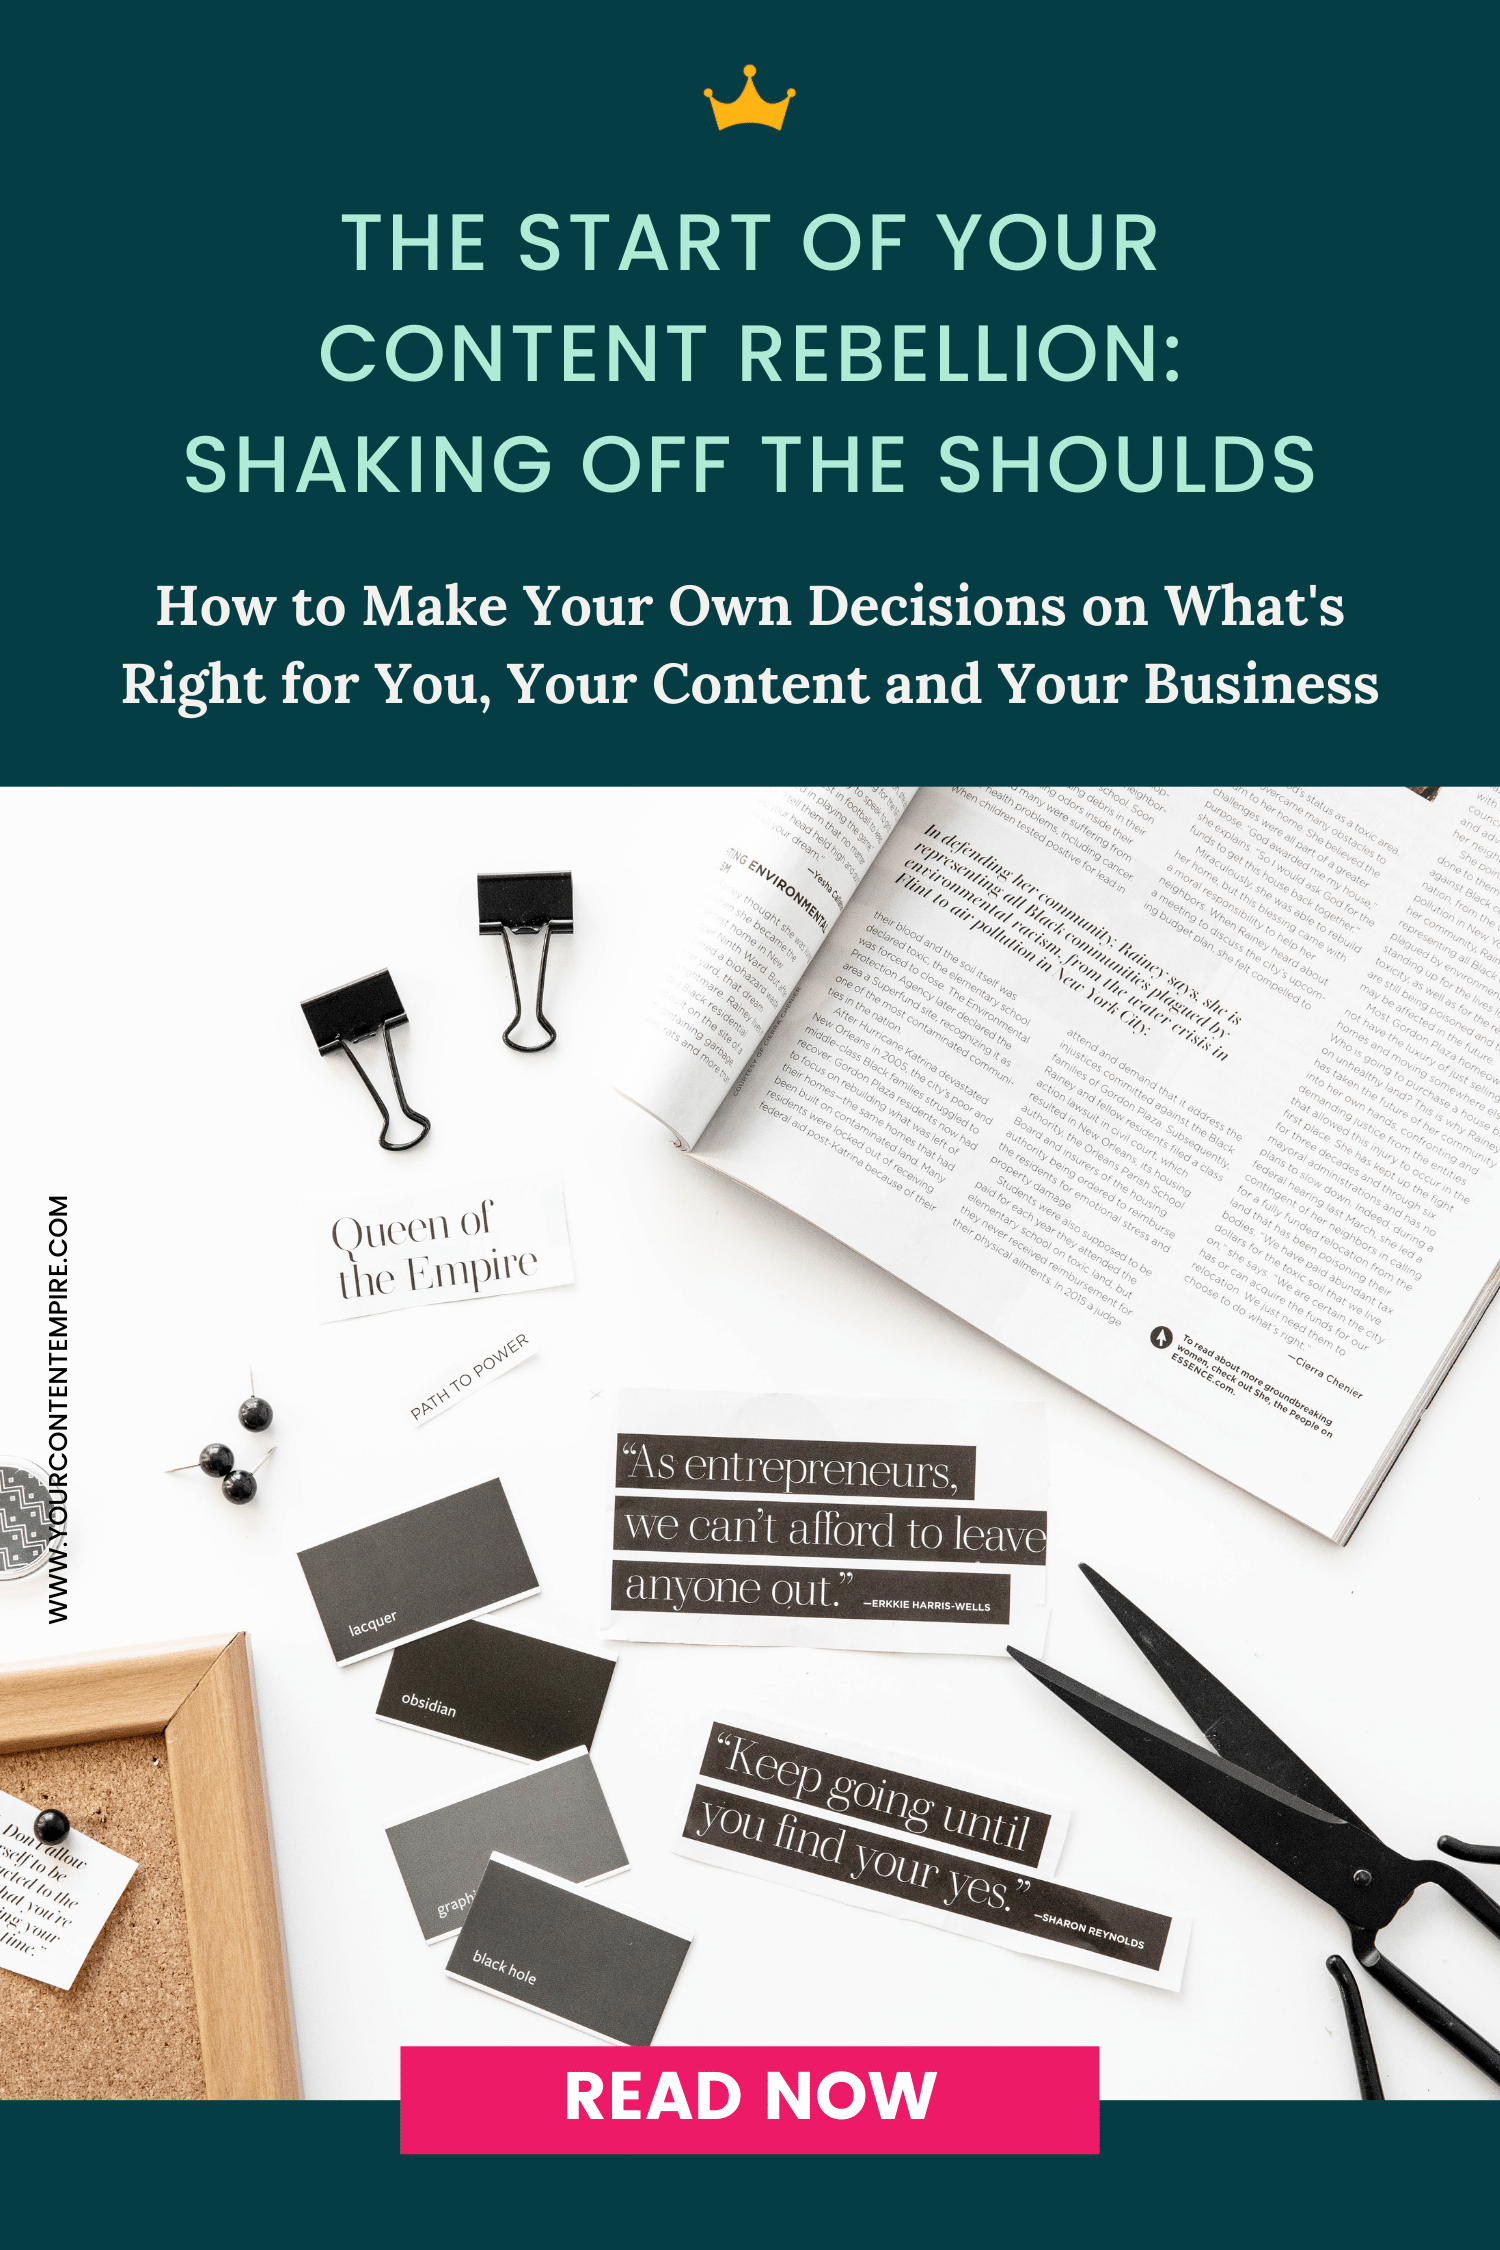 The Start of Your Content Rebellion: Shaking Off the Shoulds